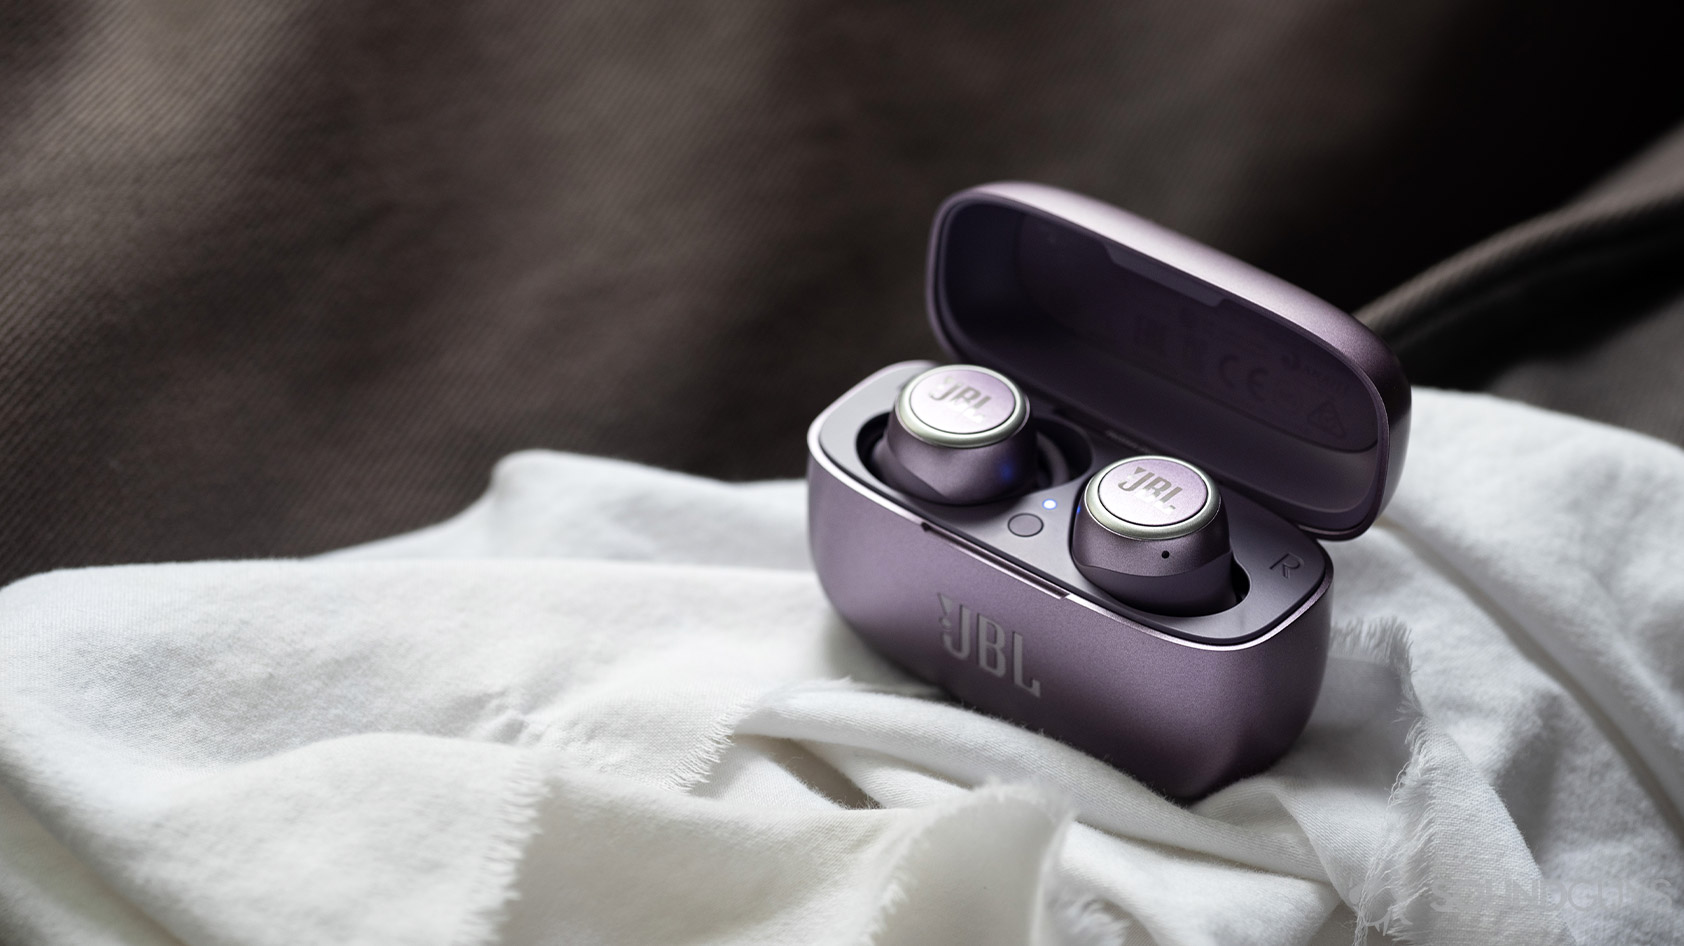 The JBL LIVE 300 TWS true wireless earbuds in the open charging case on top of a white cloth surface.